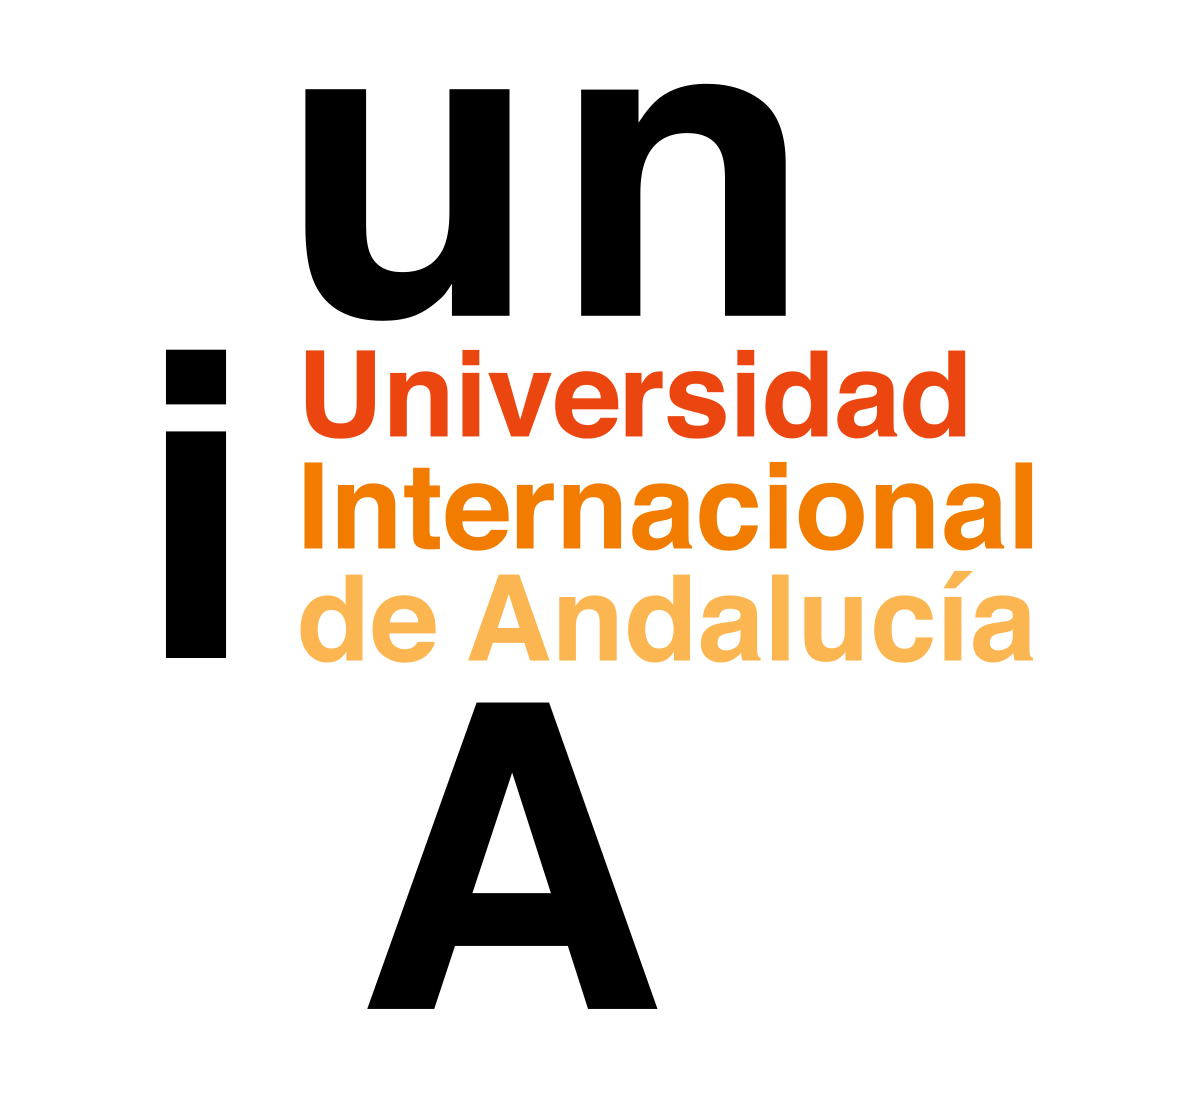 Andalucia Logo PNG - 112470